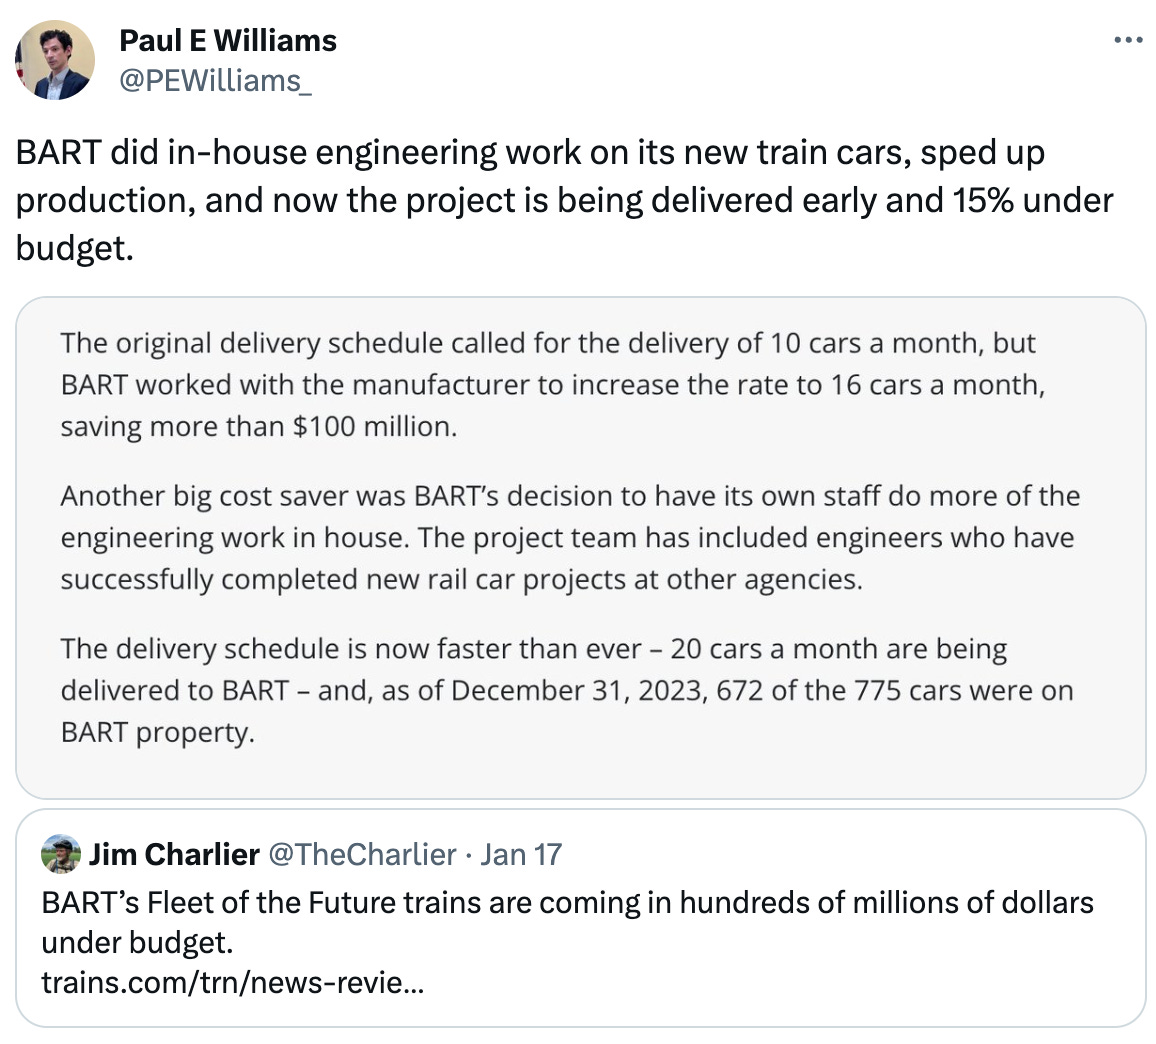  Paul E Williams @PEWilliams_ BART did in-house engineering work on its new train cars, sped up production, and now the project is being delivered early and 15% under budget. Quote Jim Charlier @TheCharlier · Jan 17 BART’s Fleet of the Future trains are coming in hundreds of millions of dollars under budget. https://trains.com/trn/news-reviews/news-wire/bart-new-car-fleet-under-budget/?_ga=2.227807253.965107043.1705527865-1656583821.1650380879